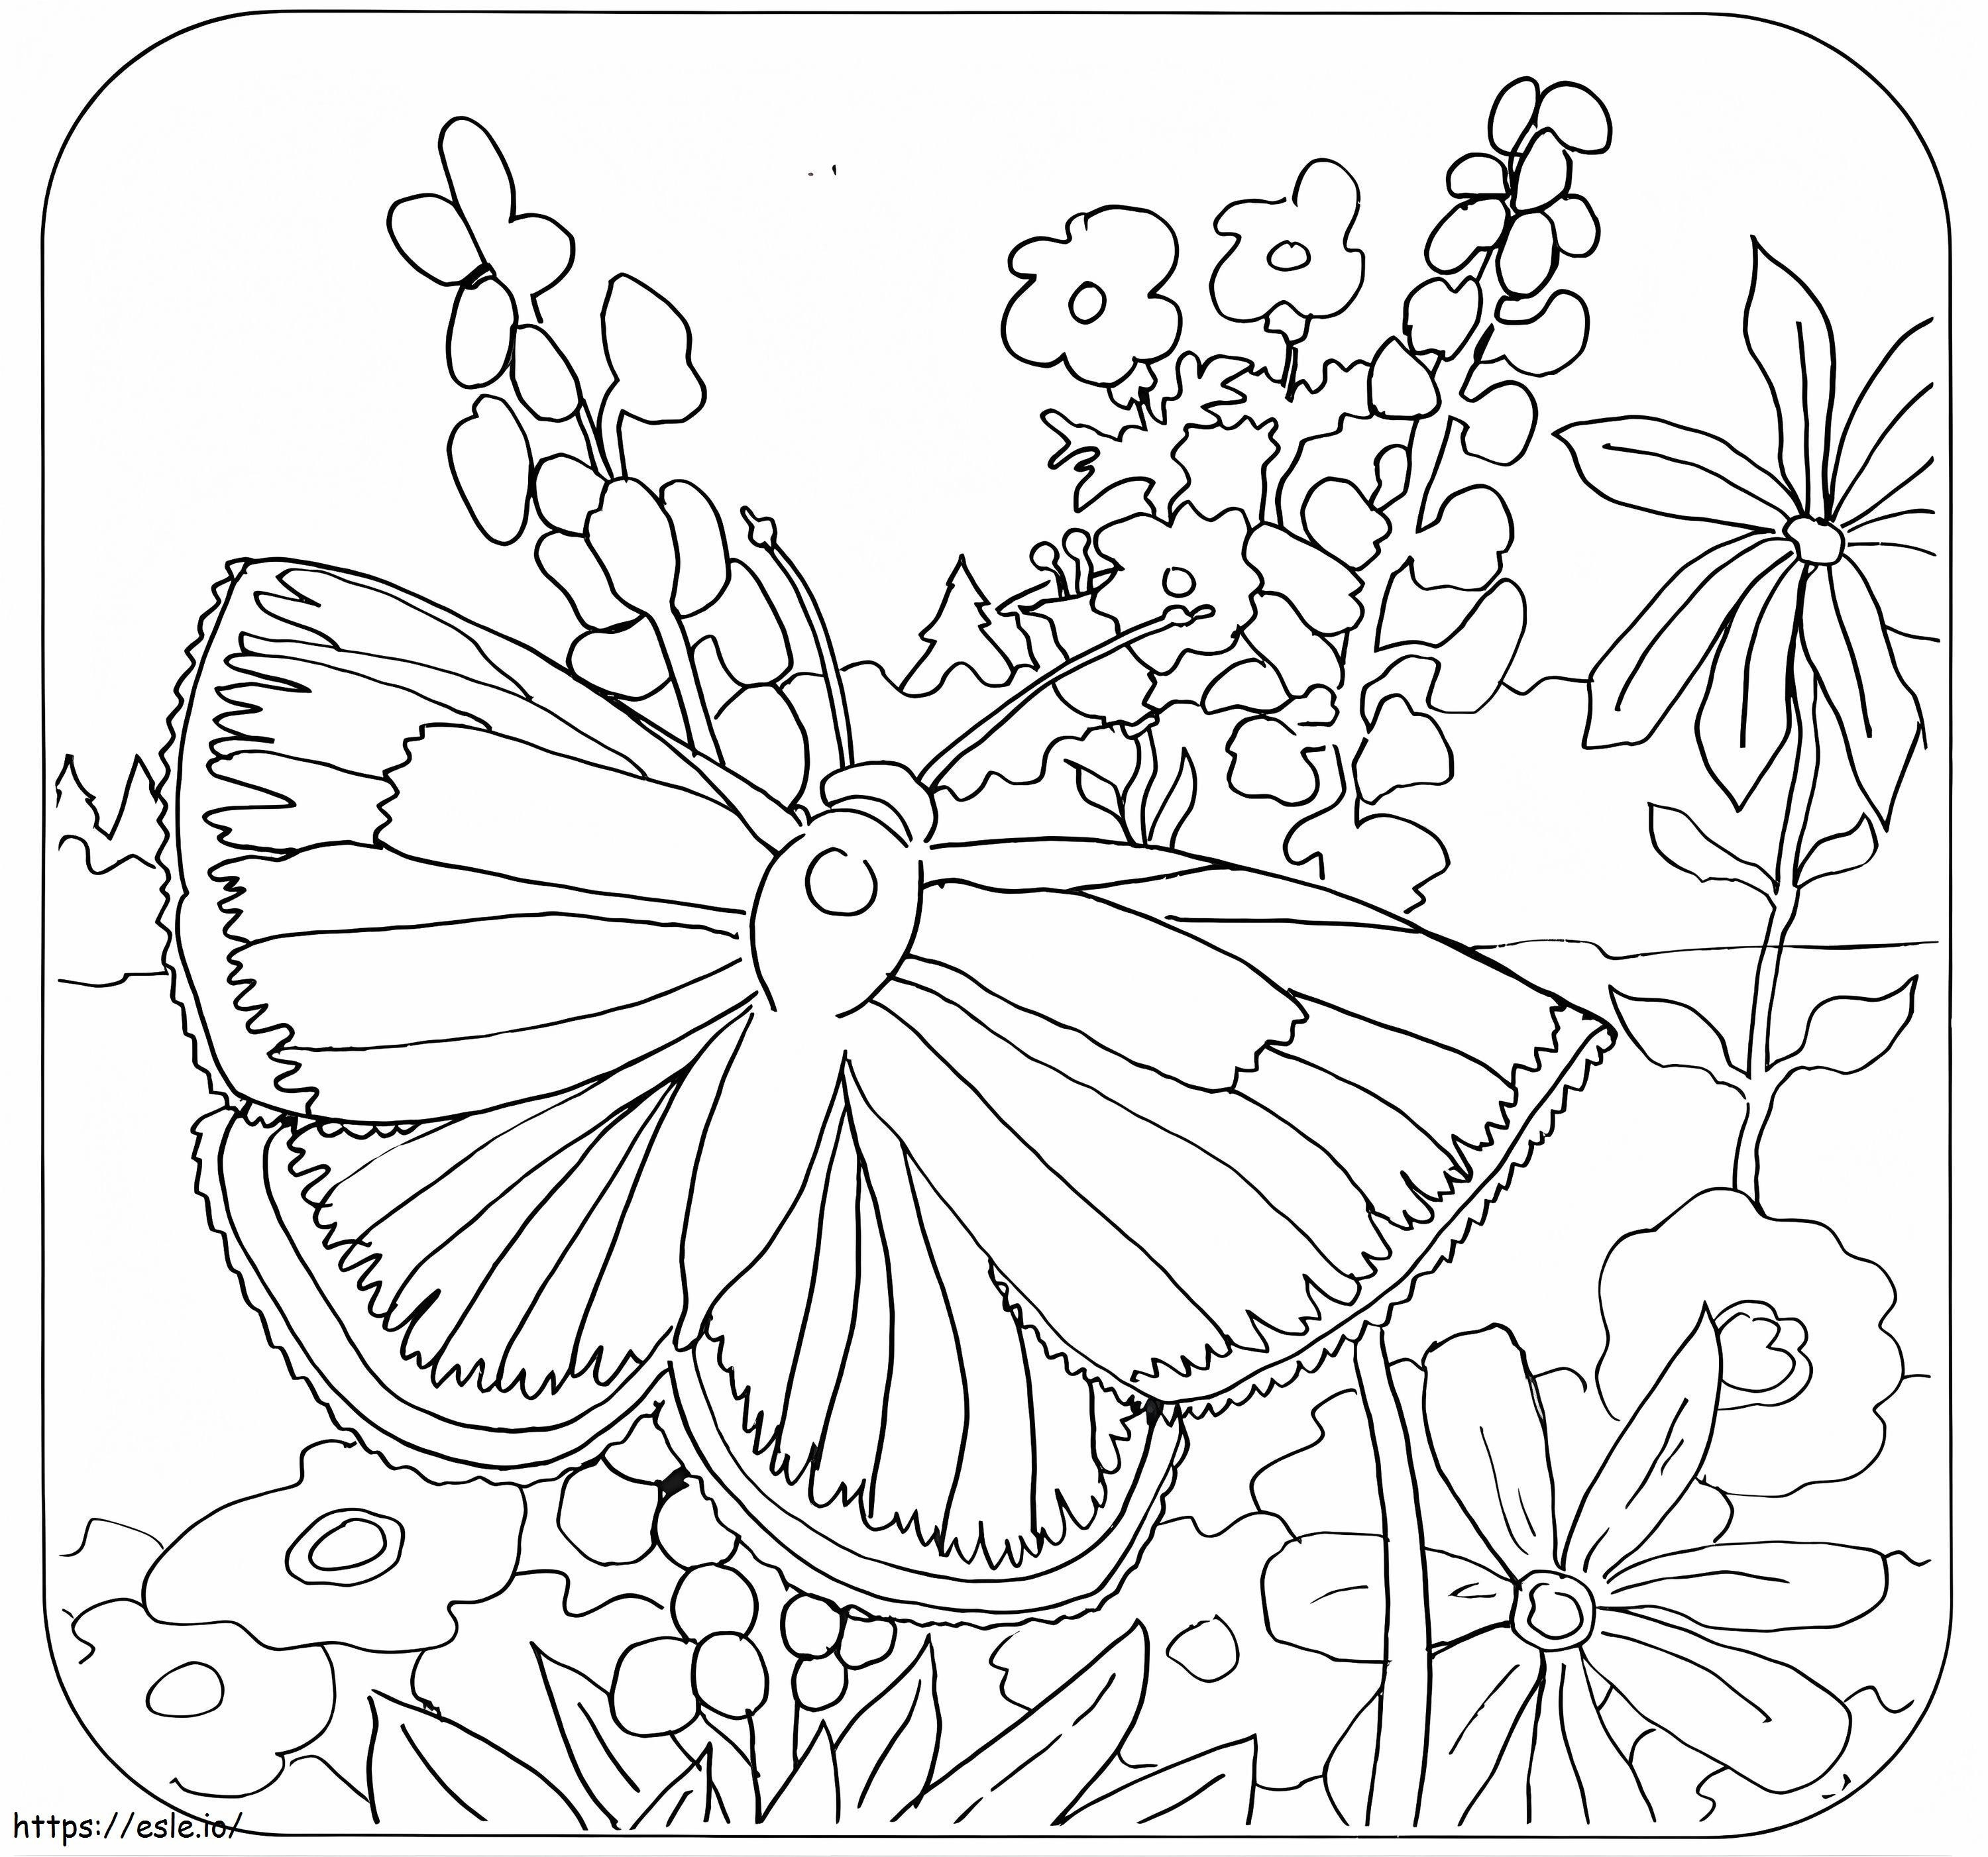 Mission Blue Butterfly coloring page